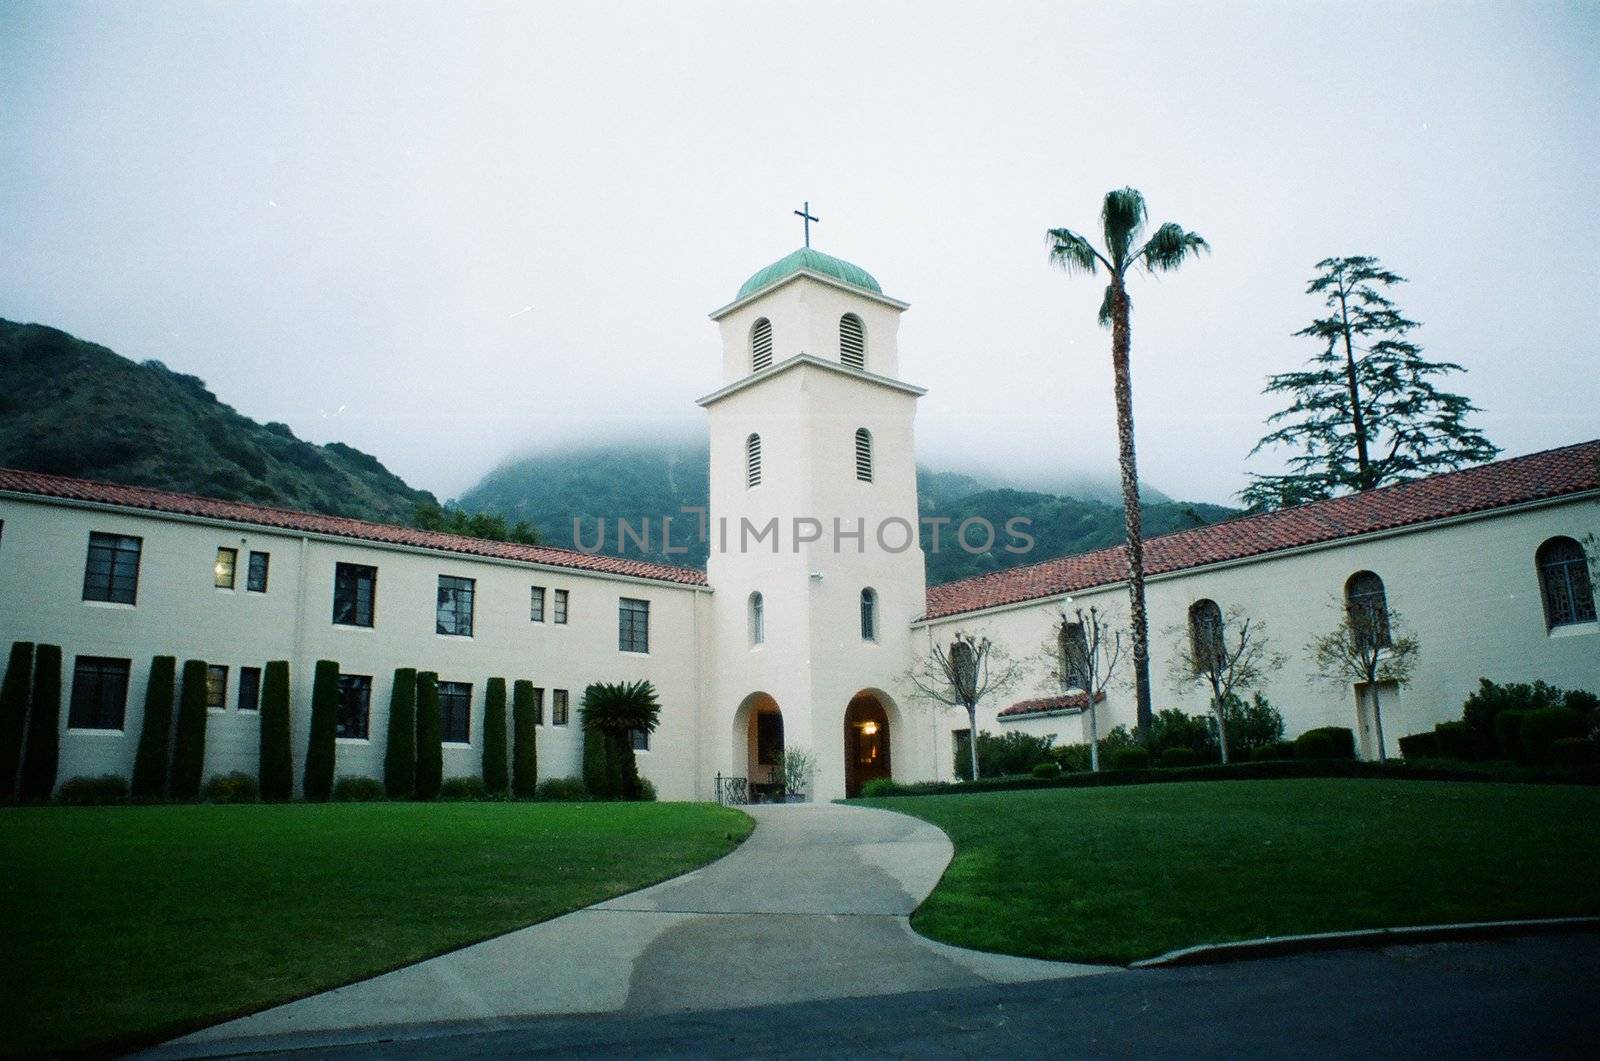 An abbey near the mountains, surrounded by fog